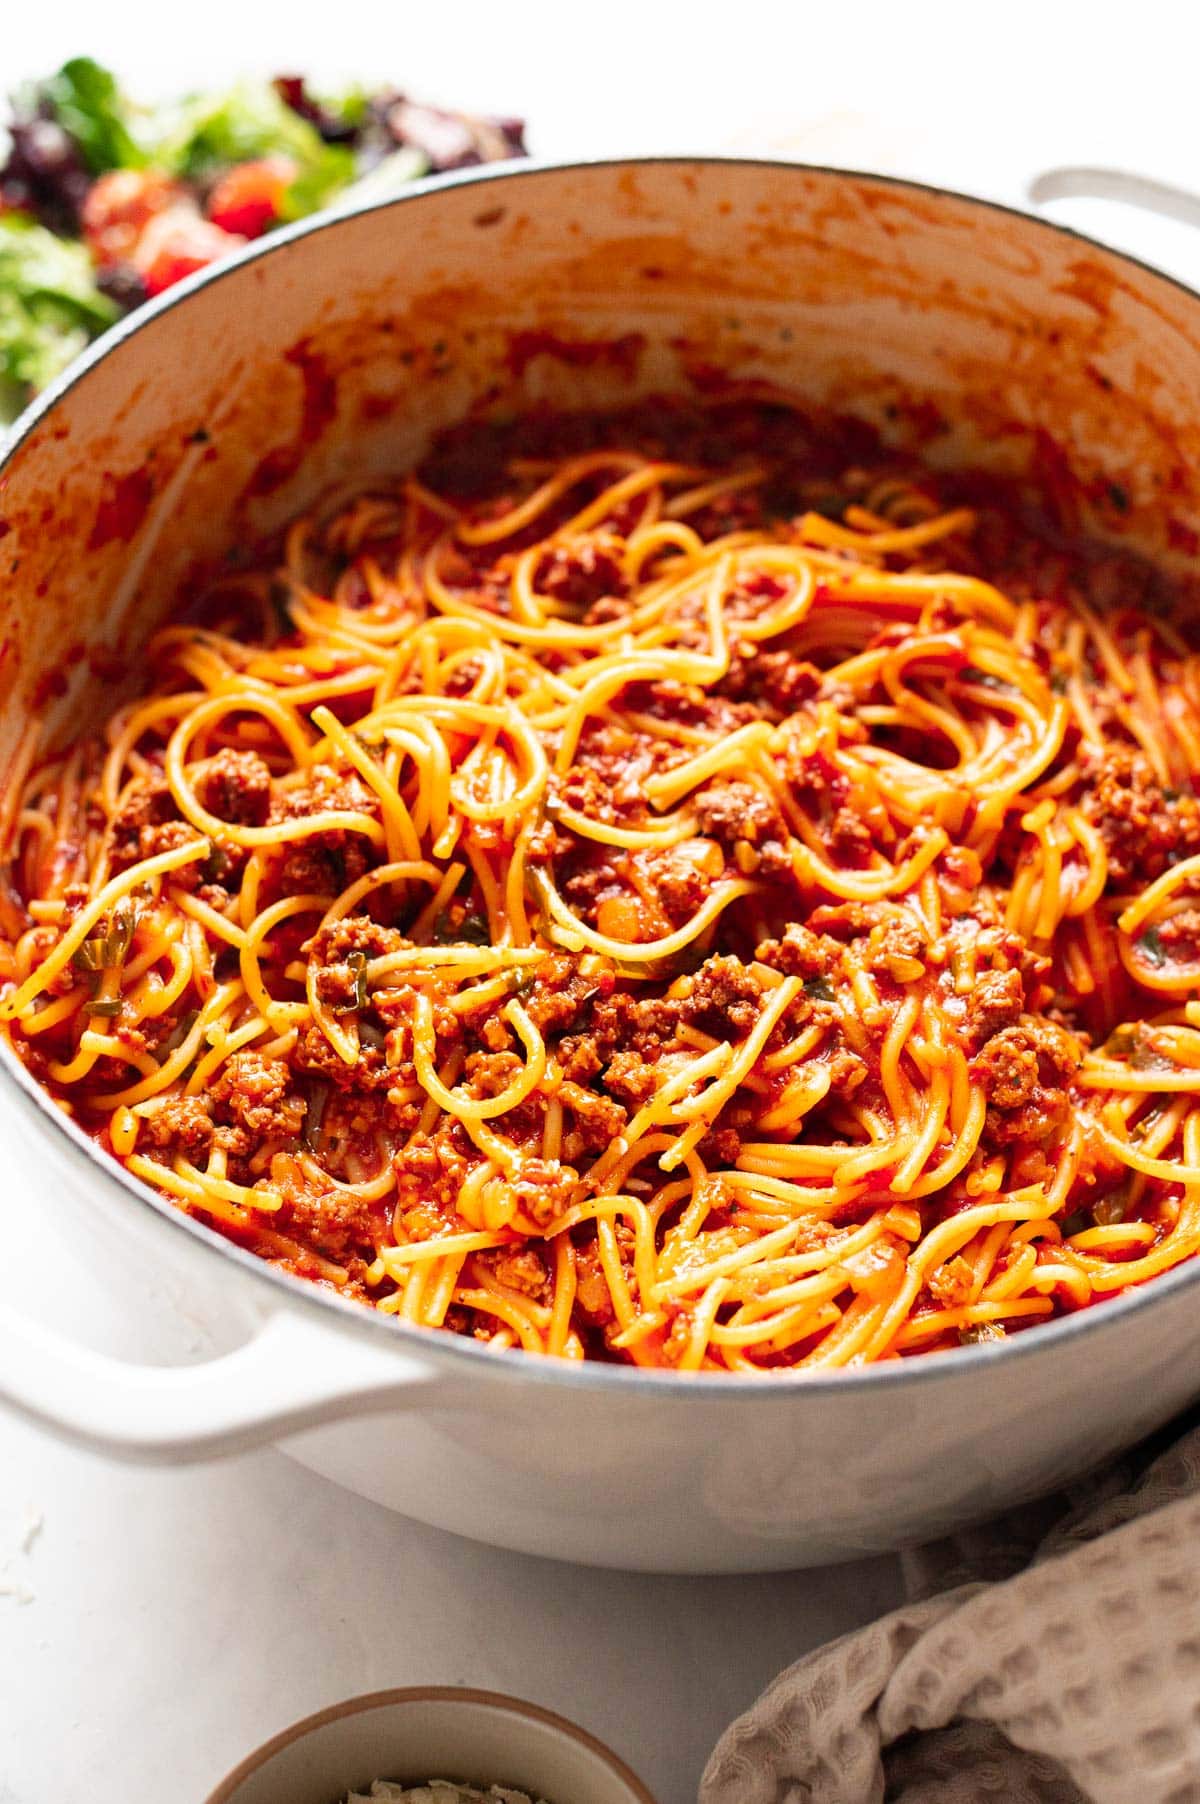 Spaghetti with meat sauce in a pot.